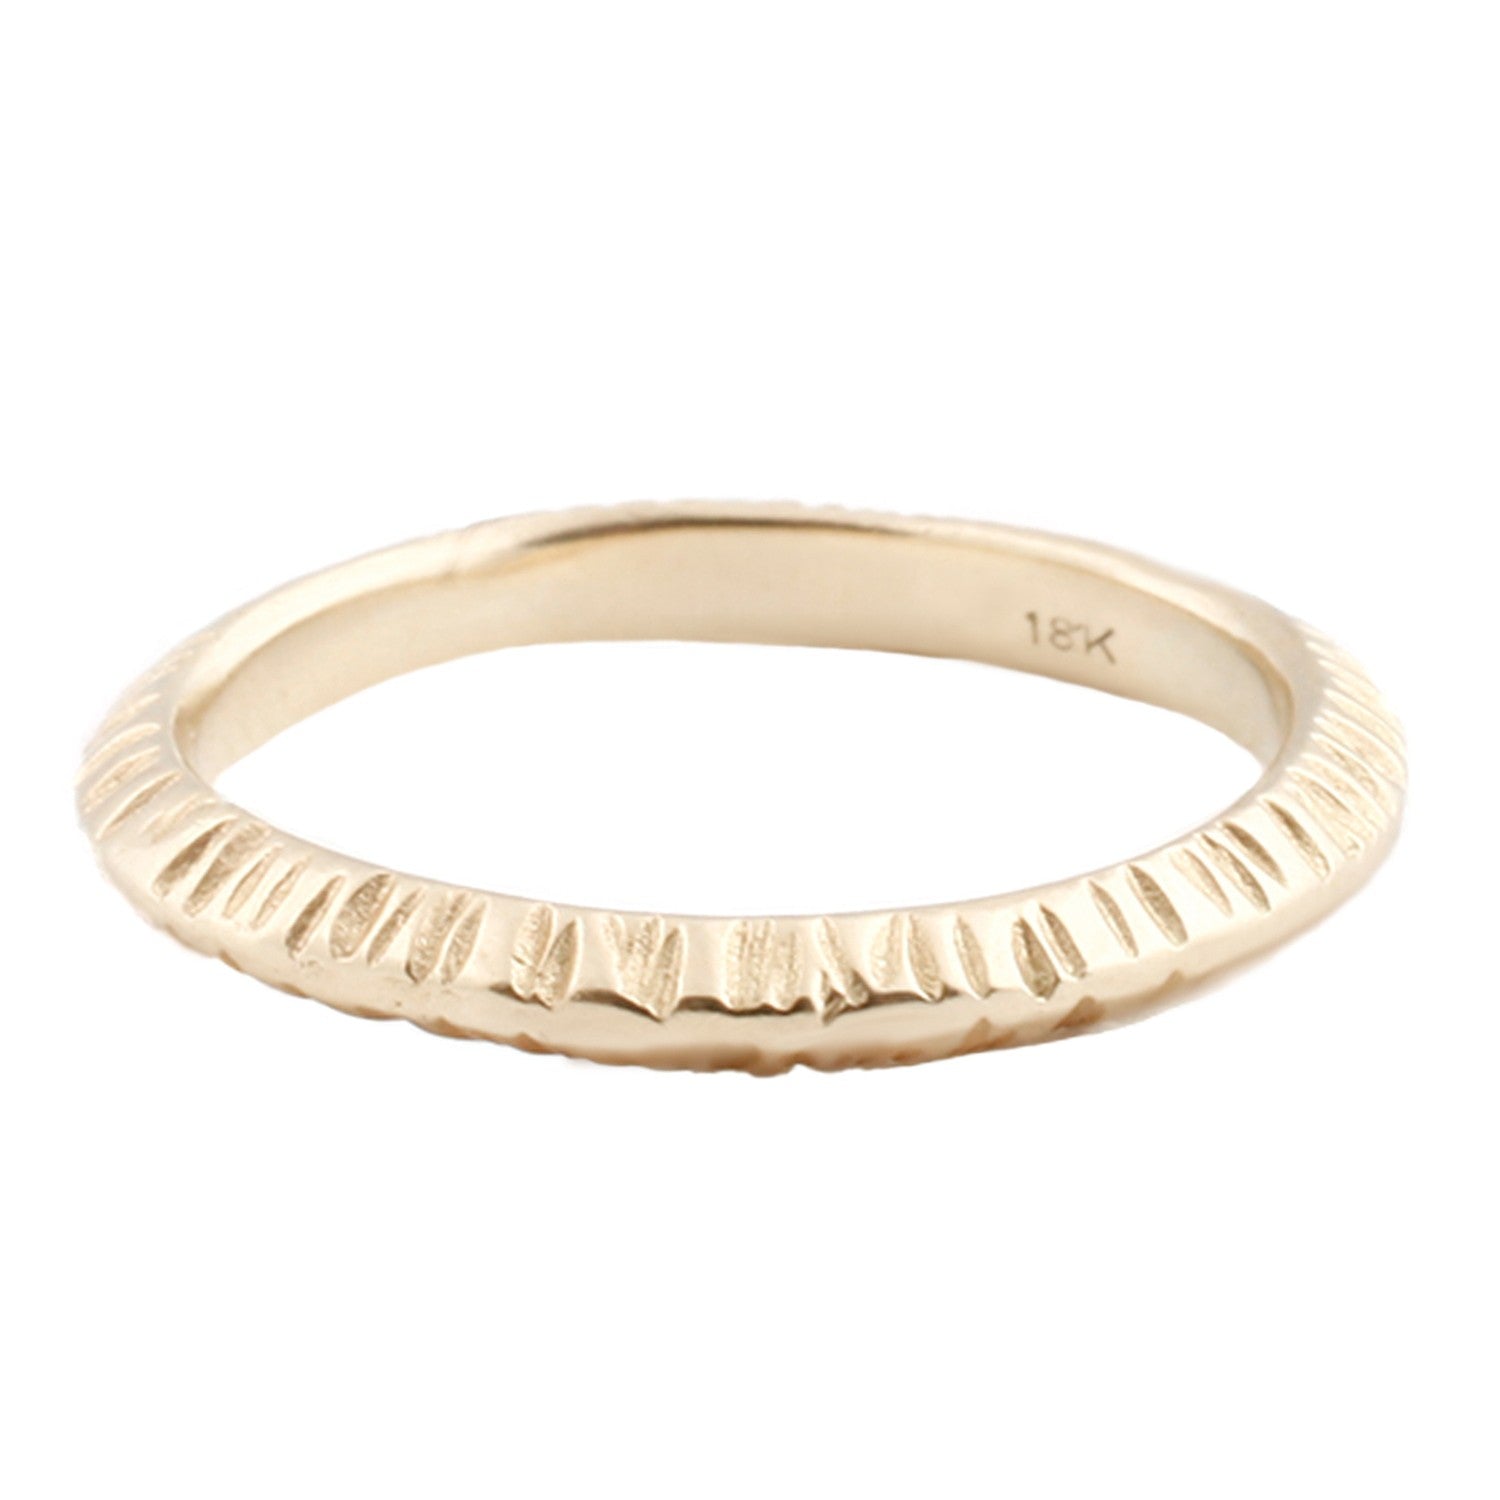 Sarah Swell Notch Band Ring